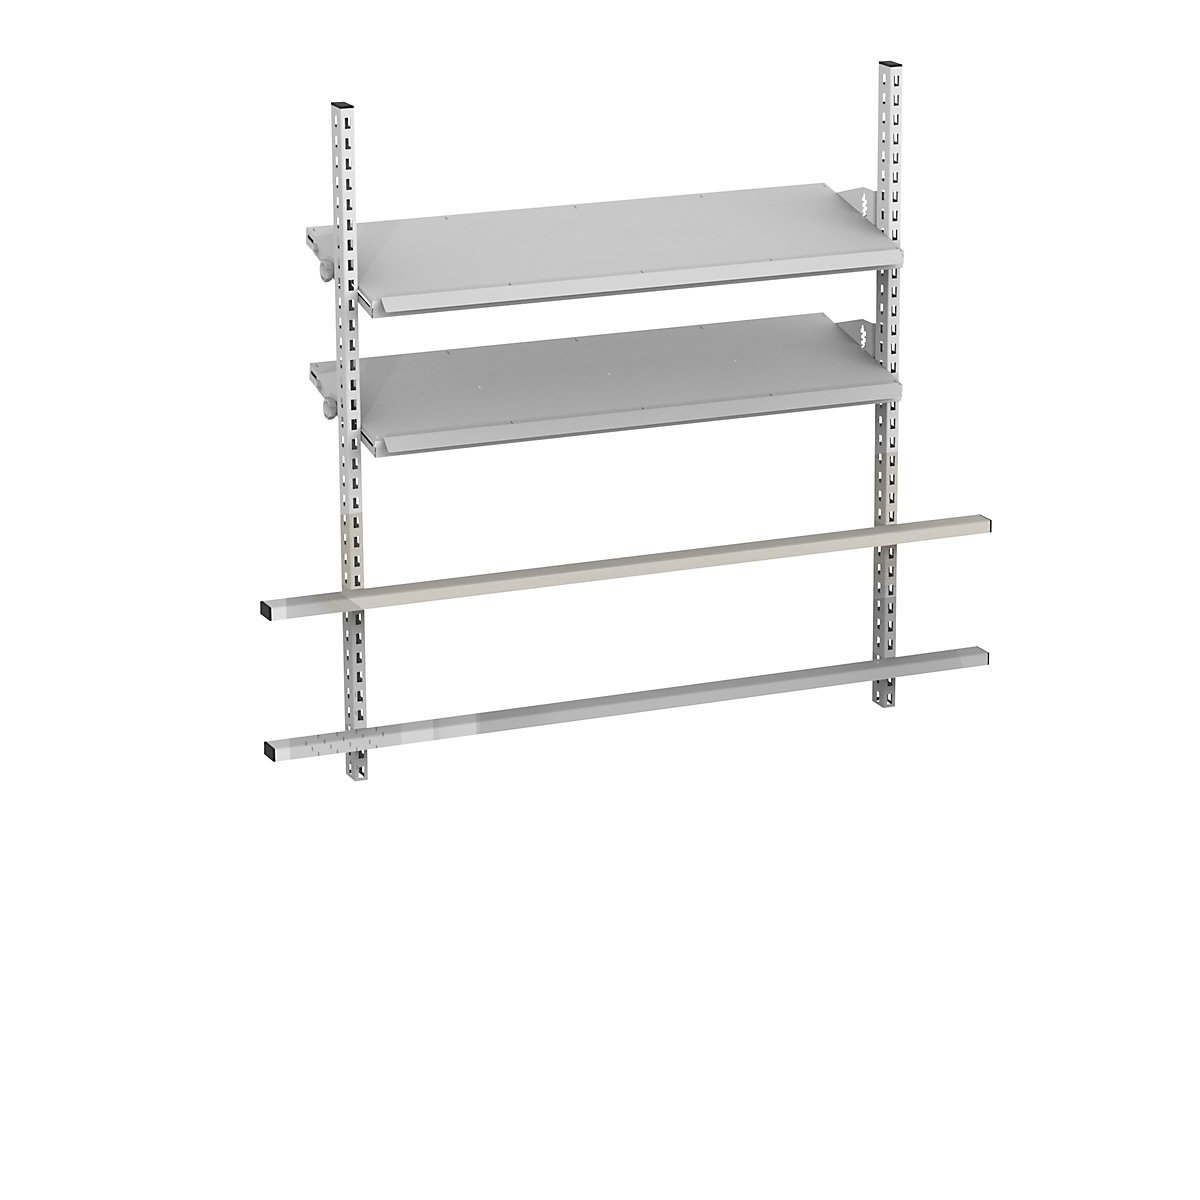 Add-on for table with inclined shelves (Product illustration 3)-2